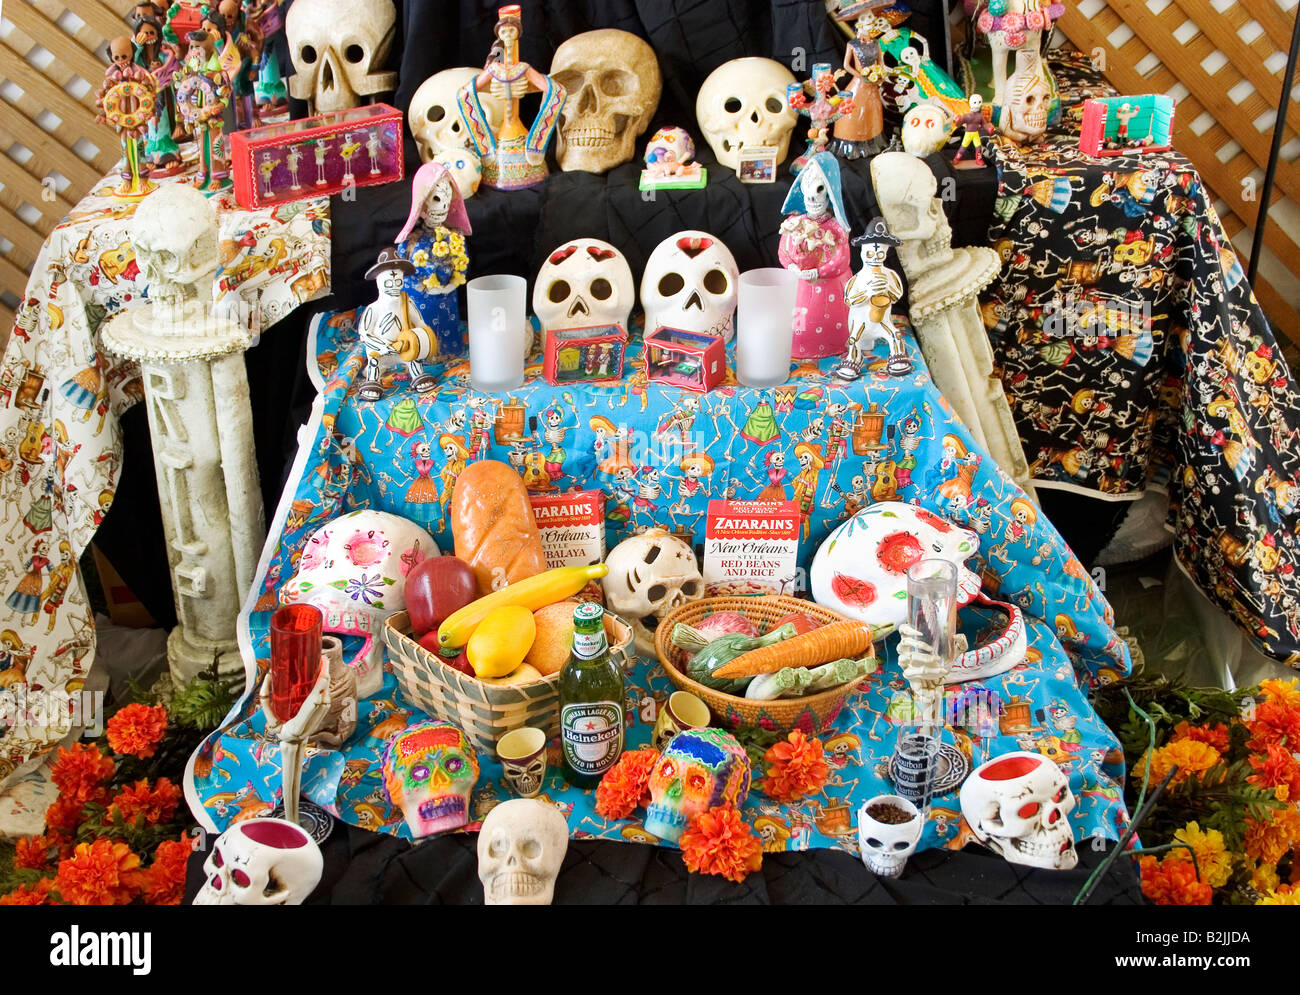 Day of the Dead altar at the New Orleans Jazz and Heritage Festival ...